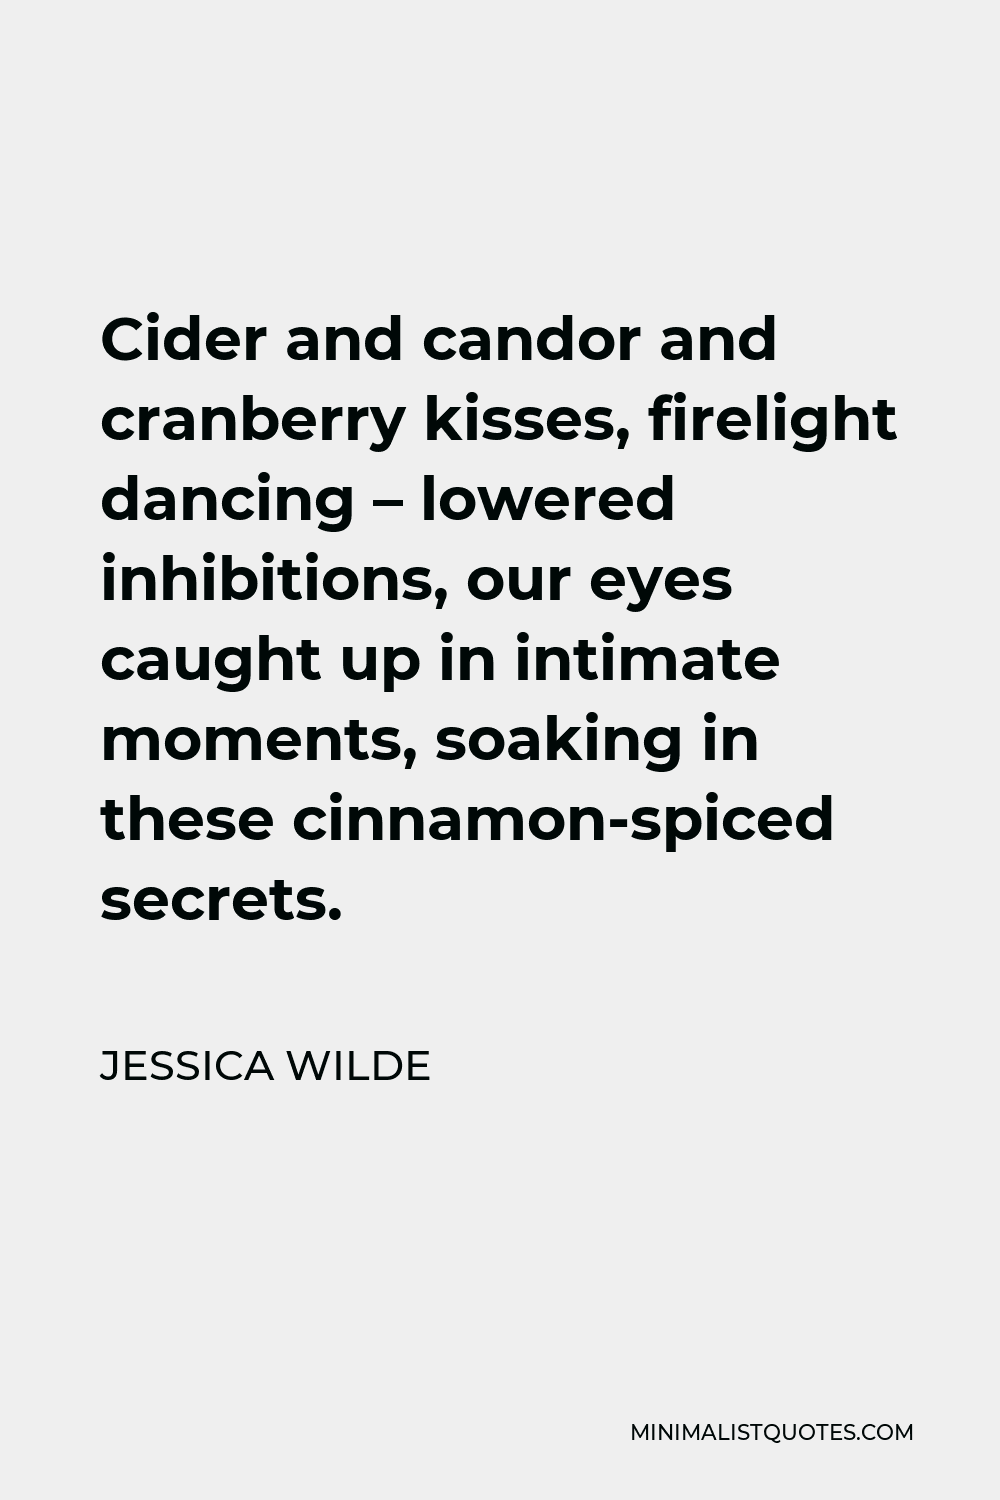 Jessica Wilde Quote - Cider and candor and cranberry kisses, firelight dancing – lowered inhibitions, our eyes caught up in intimate moments, soaking in these cinnamon-spiced secrets.